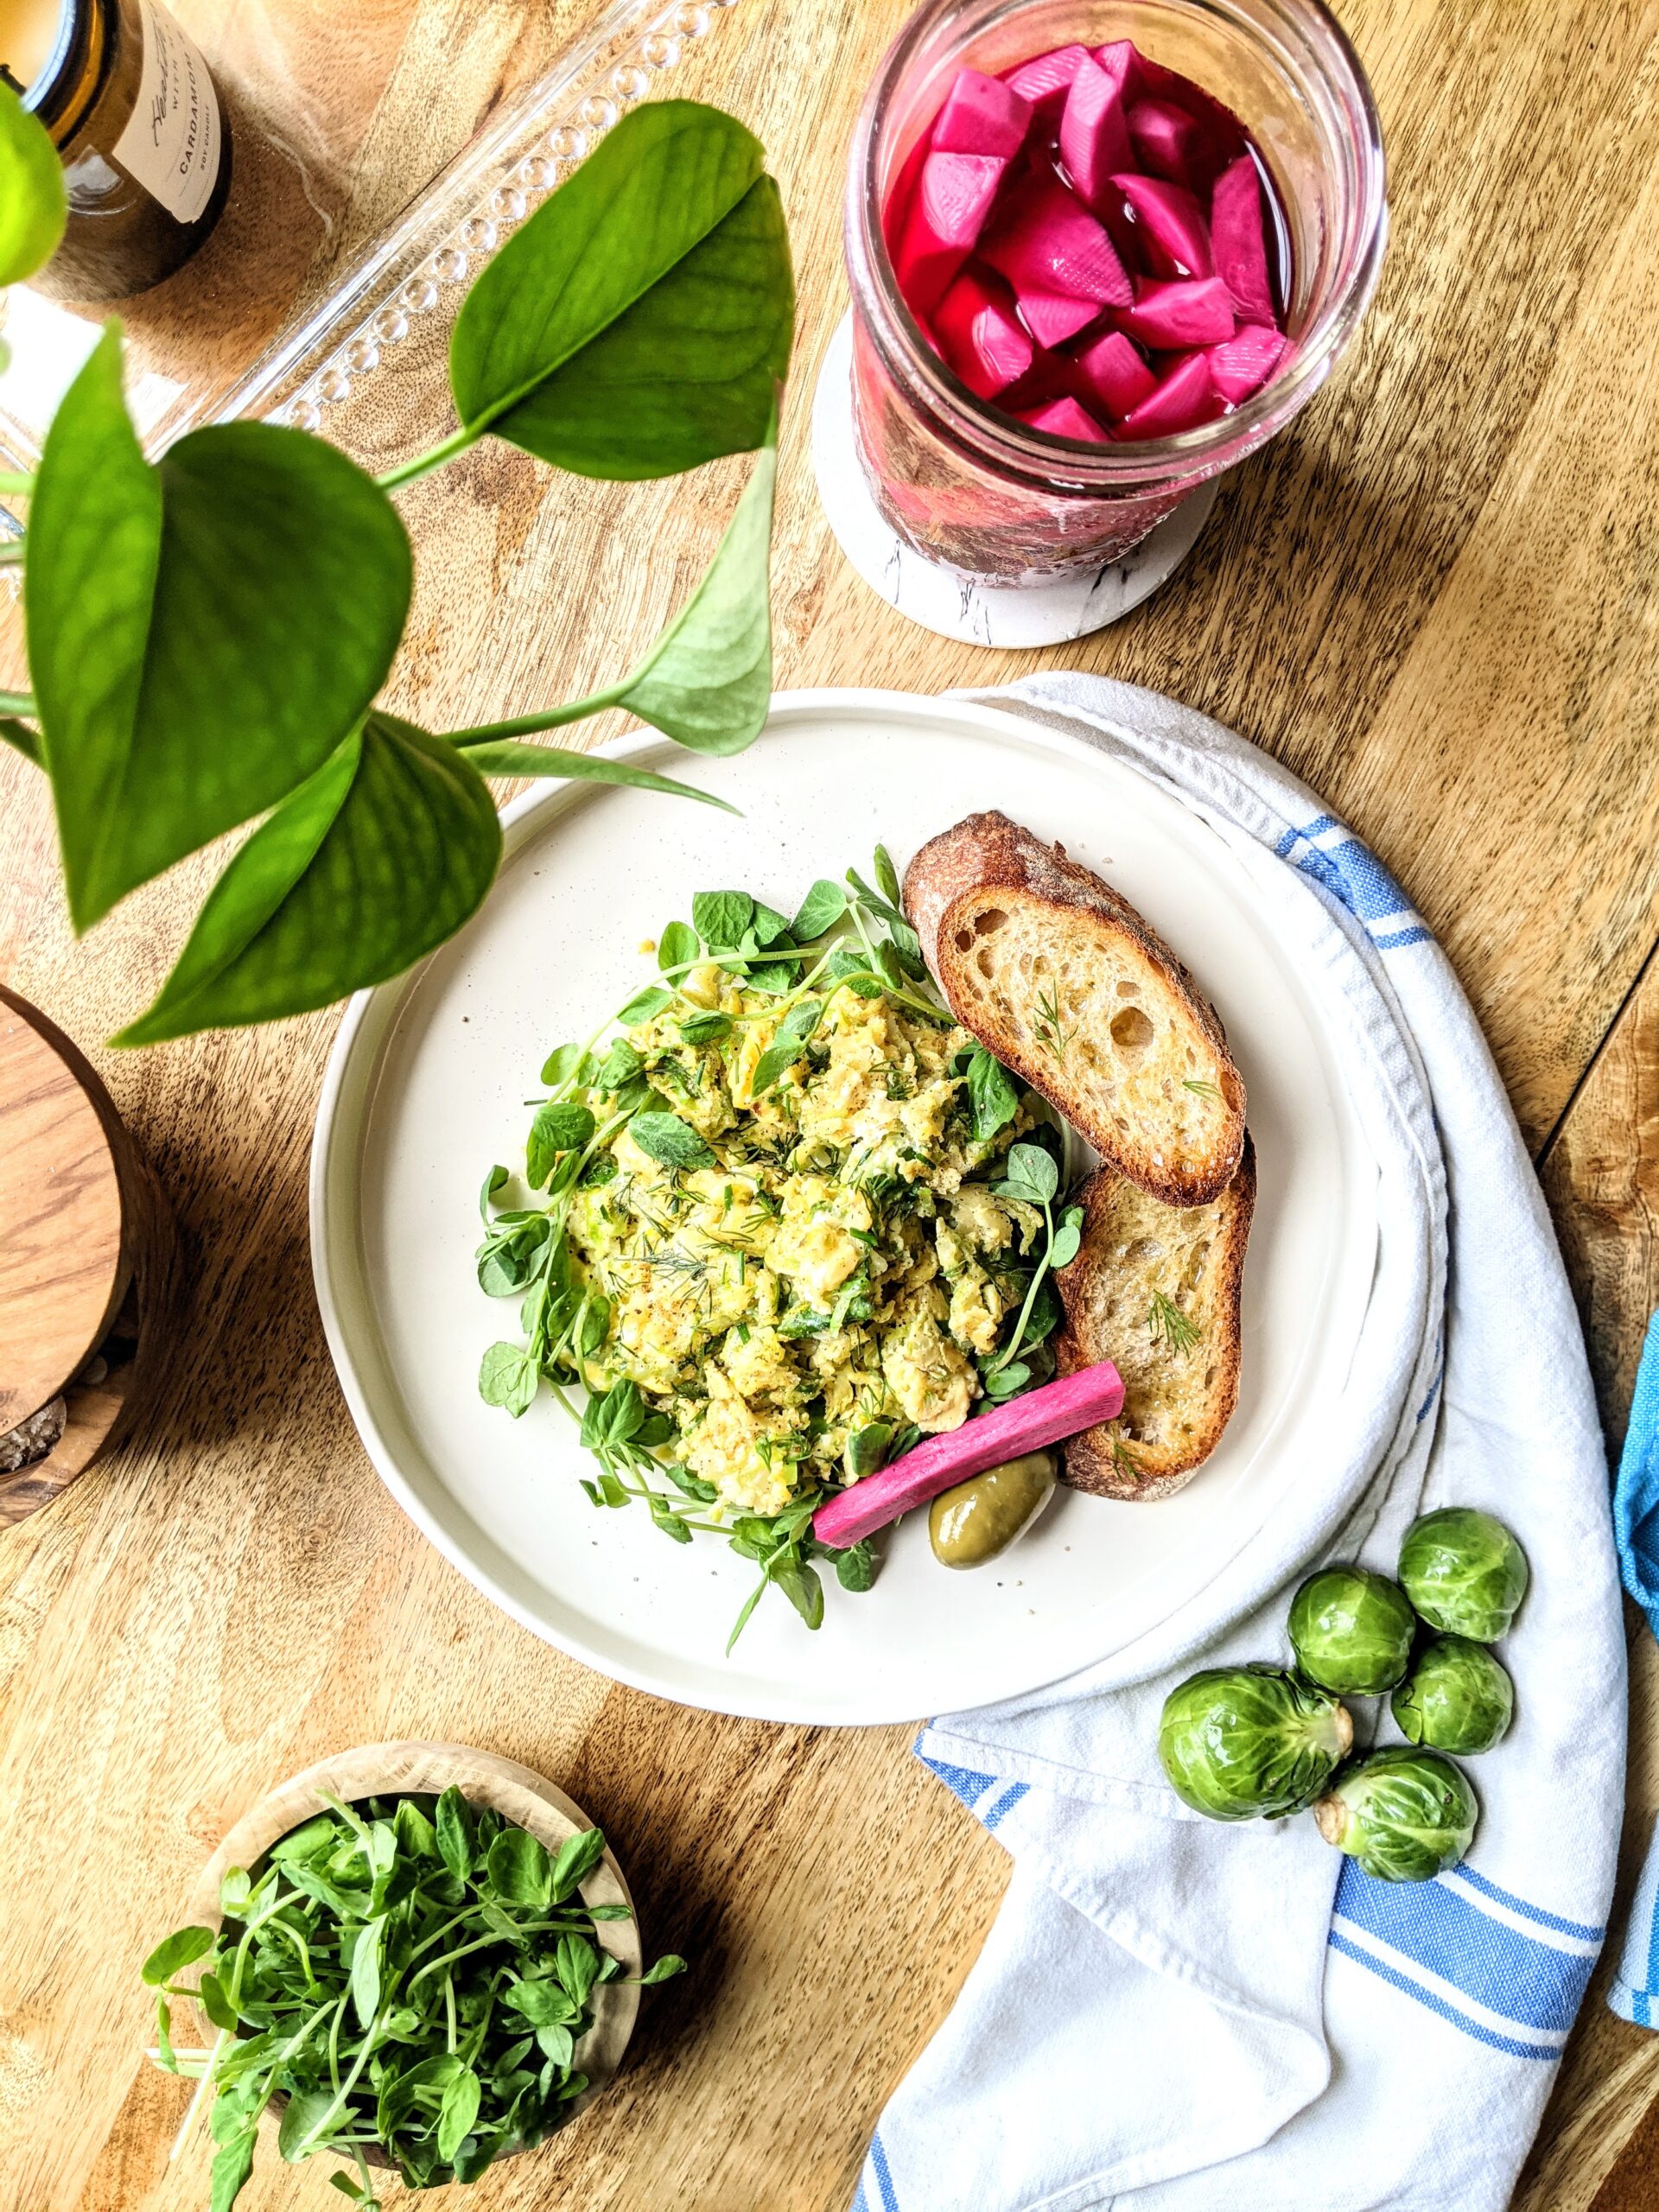 Brussels sprouts scramble with Pecorino cheese and pea shoots, served with homemade pickled turnips and sourdough toasts.